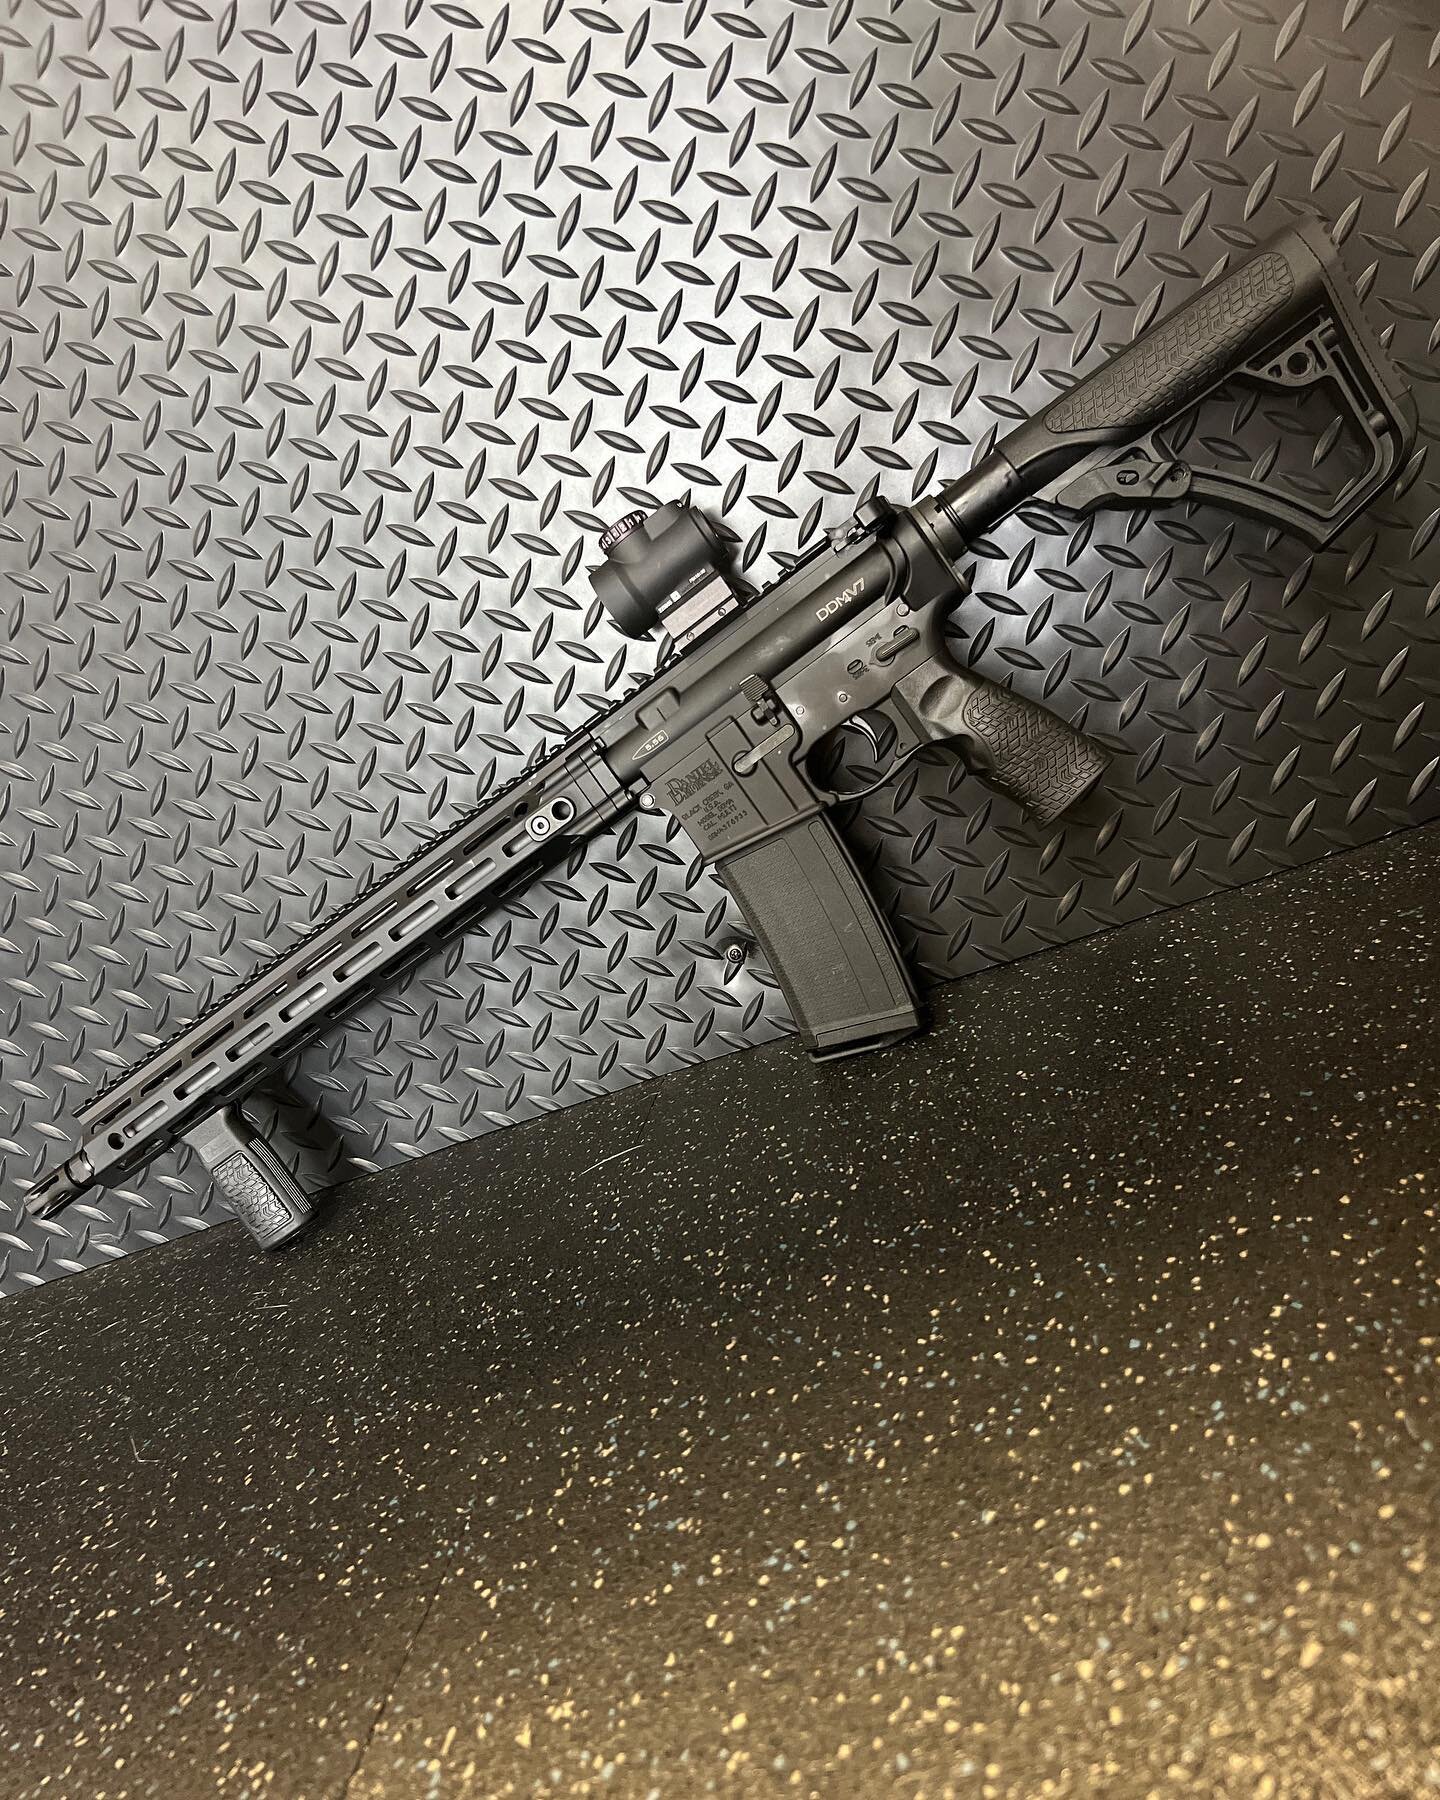 Daniel Defense DDM4v7 &amp; Trijicon MRO combo! 
-MRO (Red Dot) w/ Lower 3rd Mount 
-The DDMv7 includes a Cold Hammer Forged Barrel, GI Spec Trigger, DD&rsquo;s Rubber Molded Furniture, &amp; High Strength MLock Hand Guard. 

Inquire today for the sp